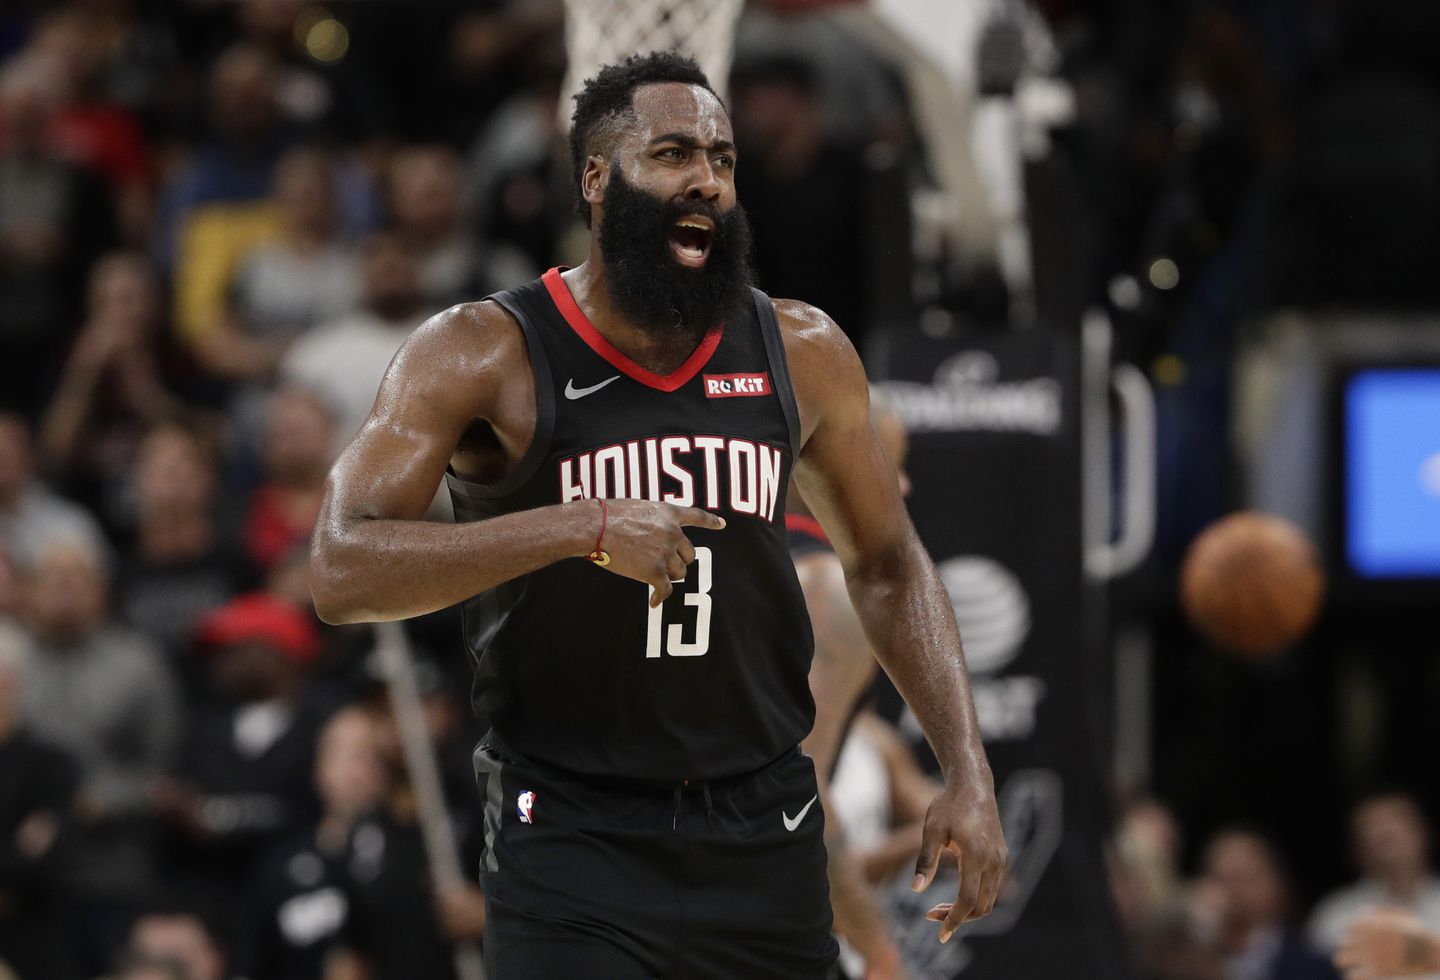 Houston Rockets to Protest Tuesday’s Loss